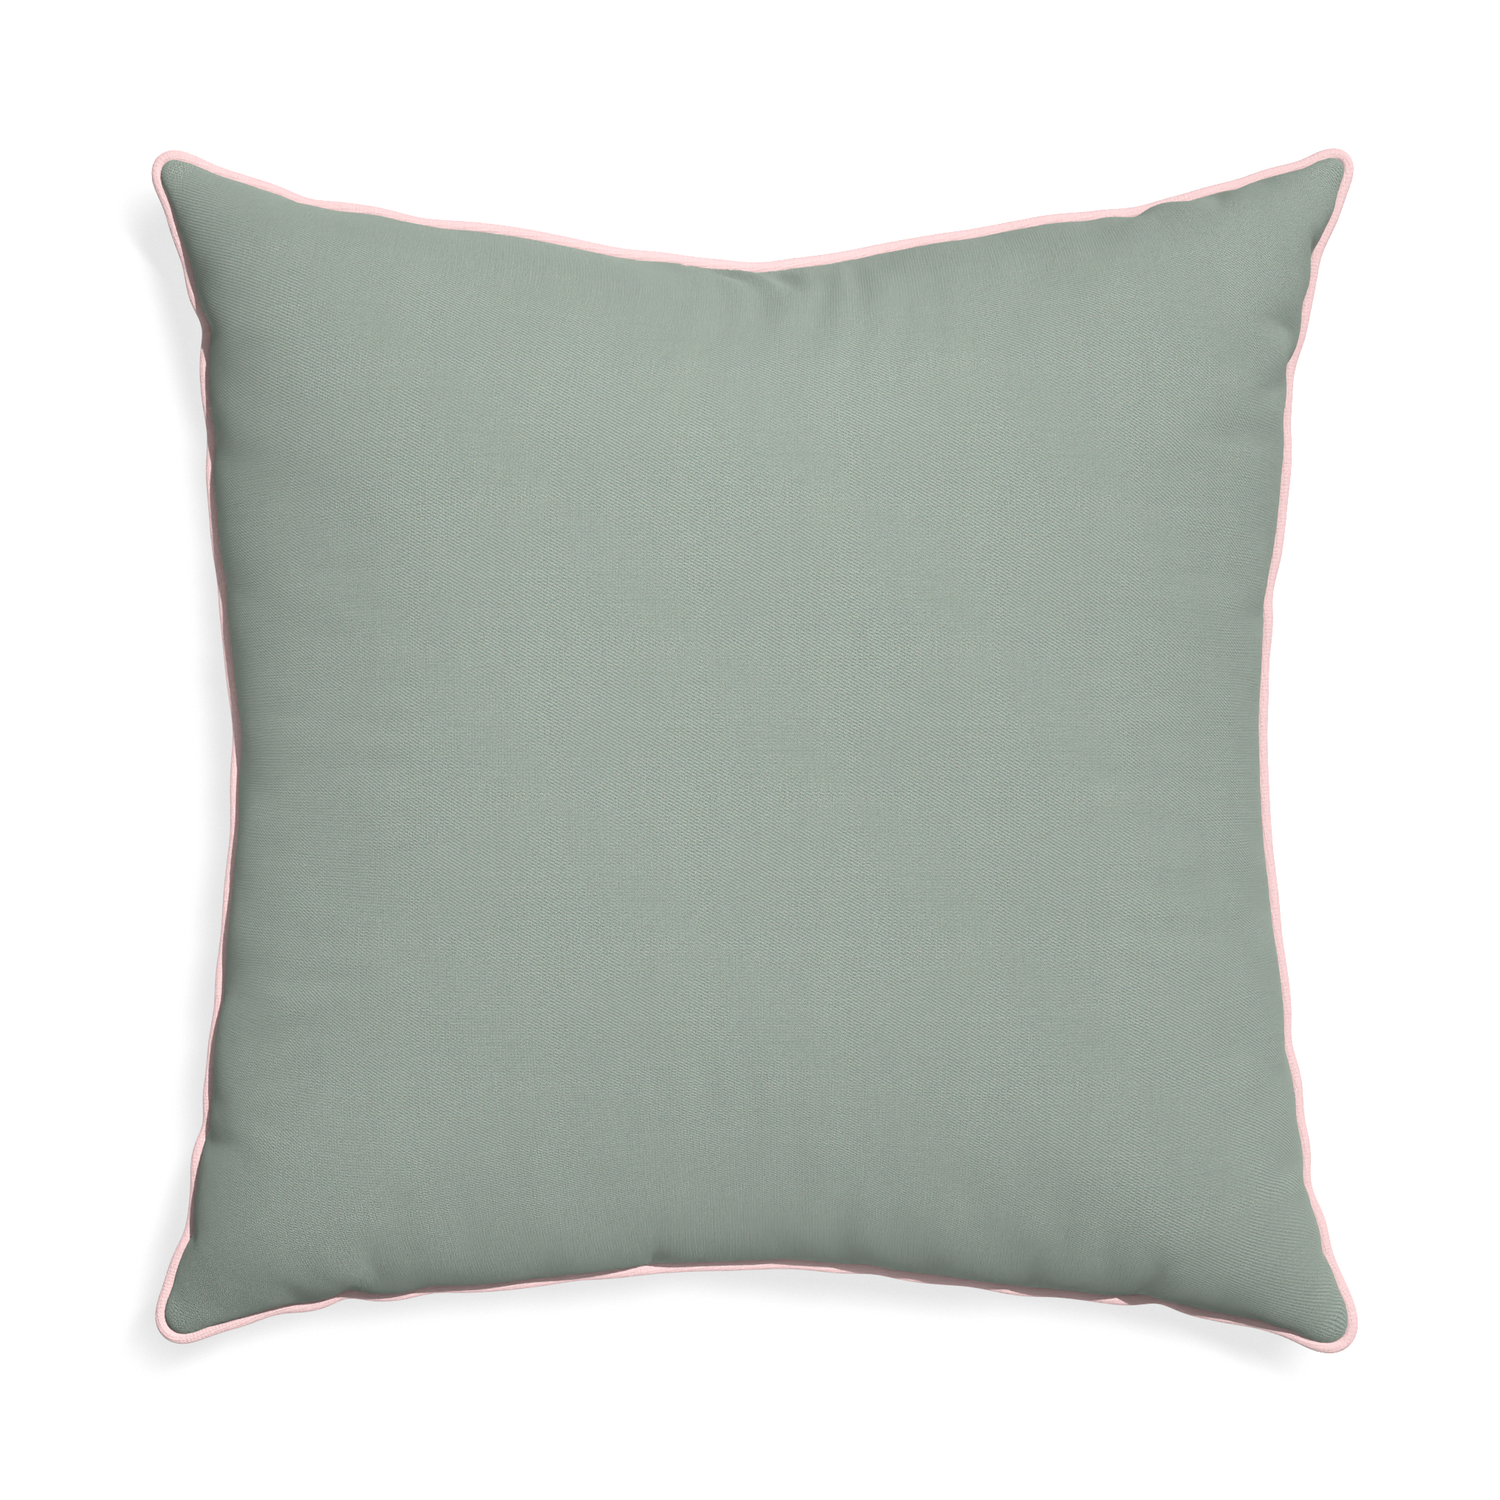 Euro-sham sage custom sage green cottonpillow with petal piping on white background